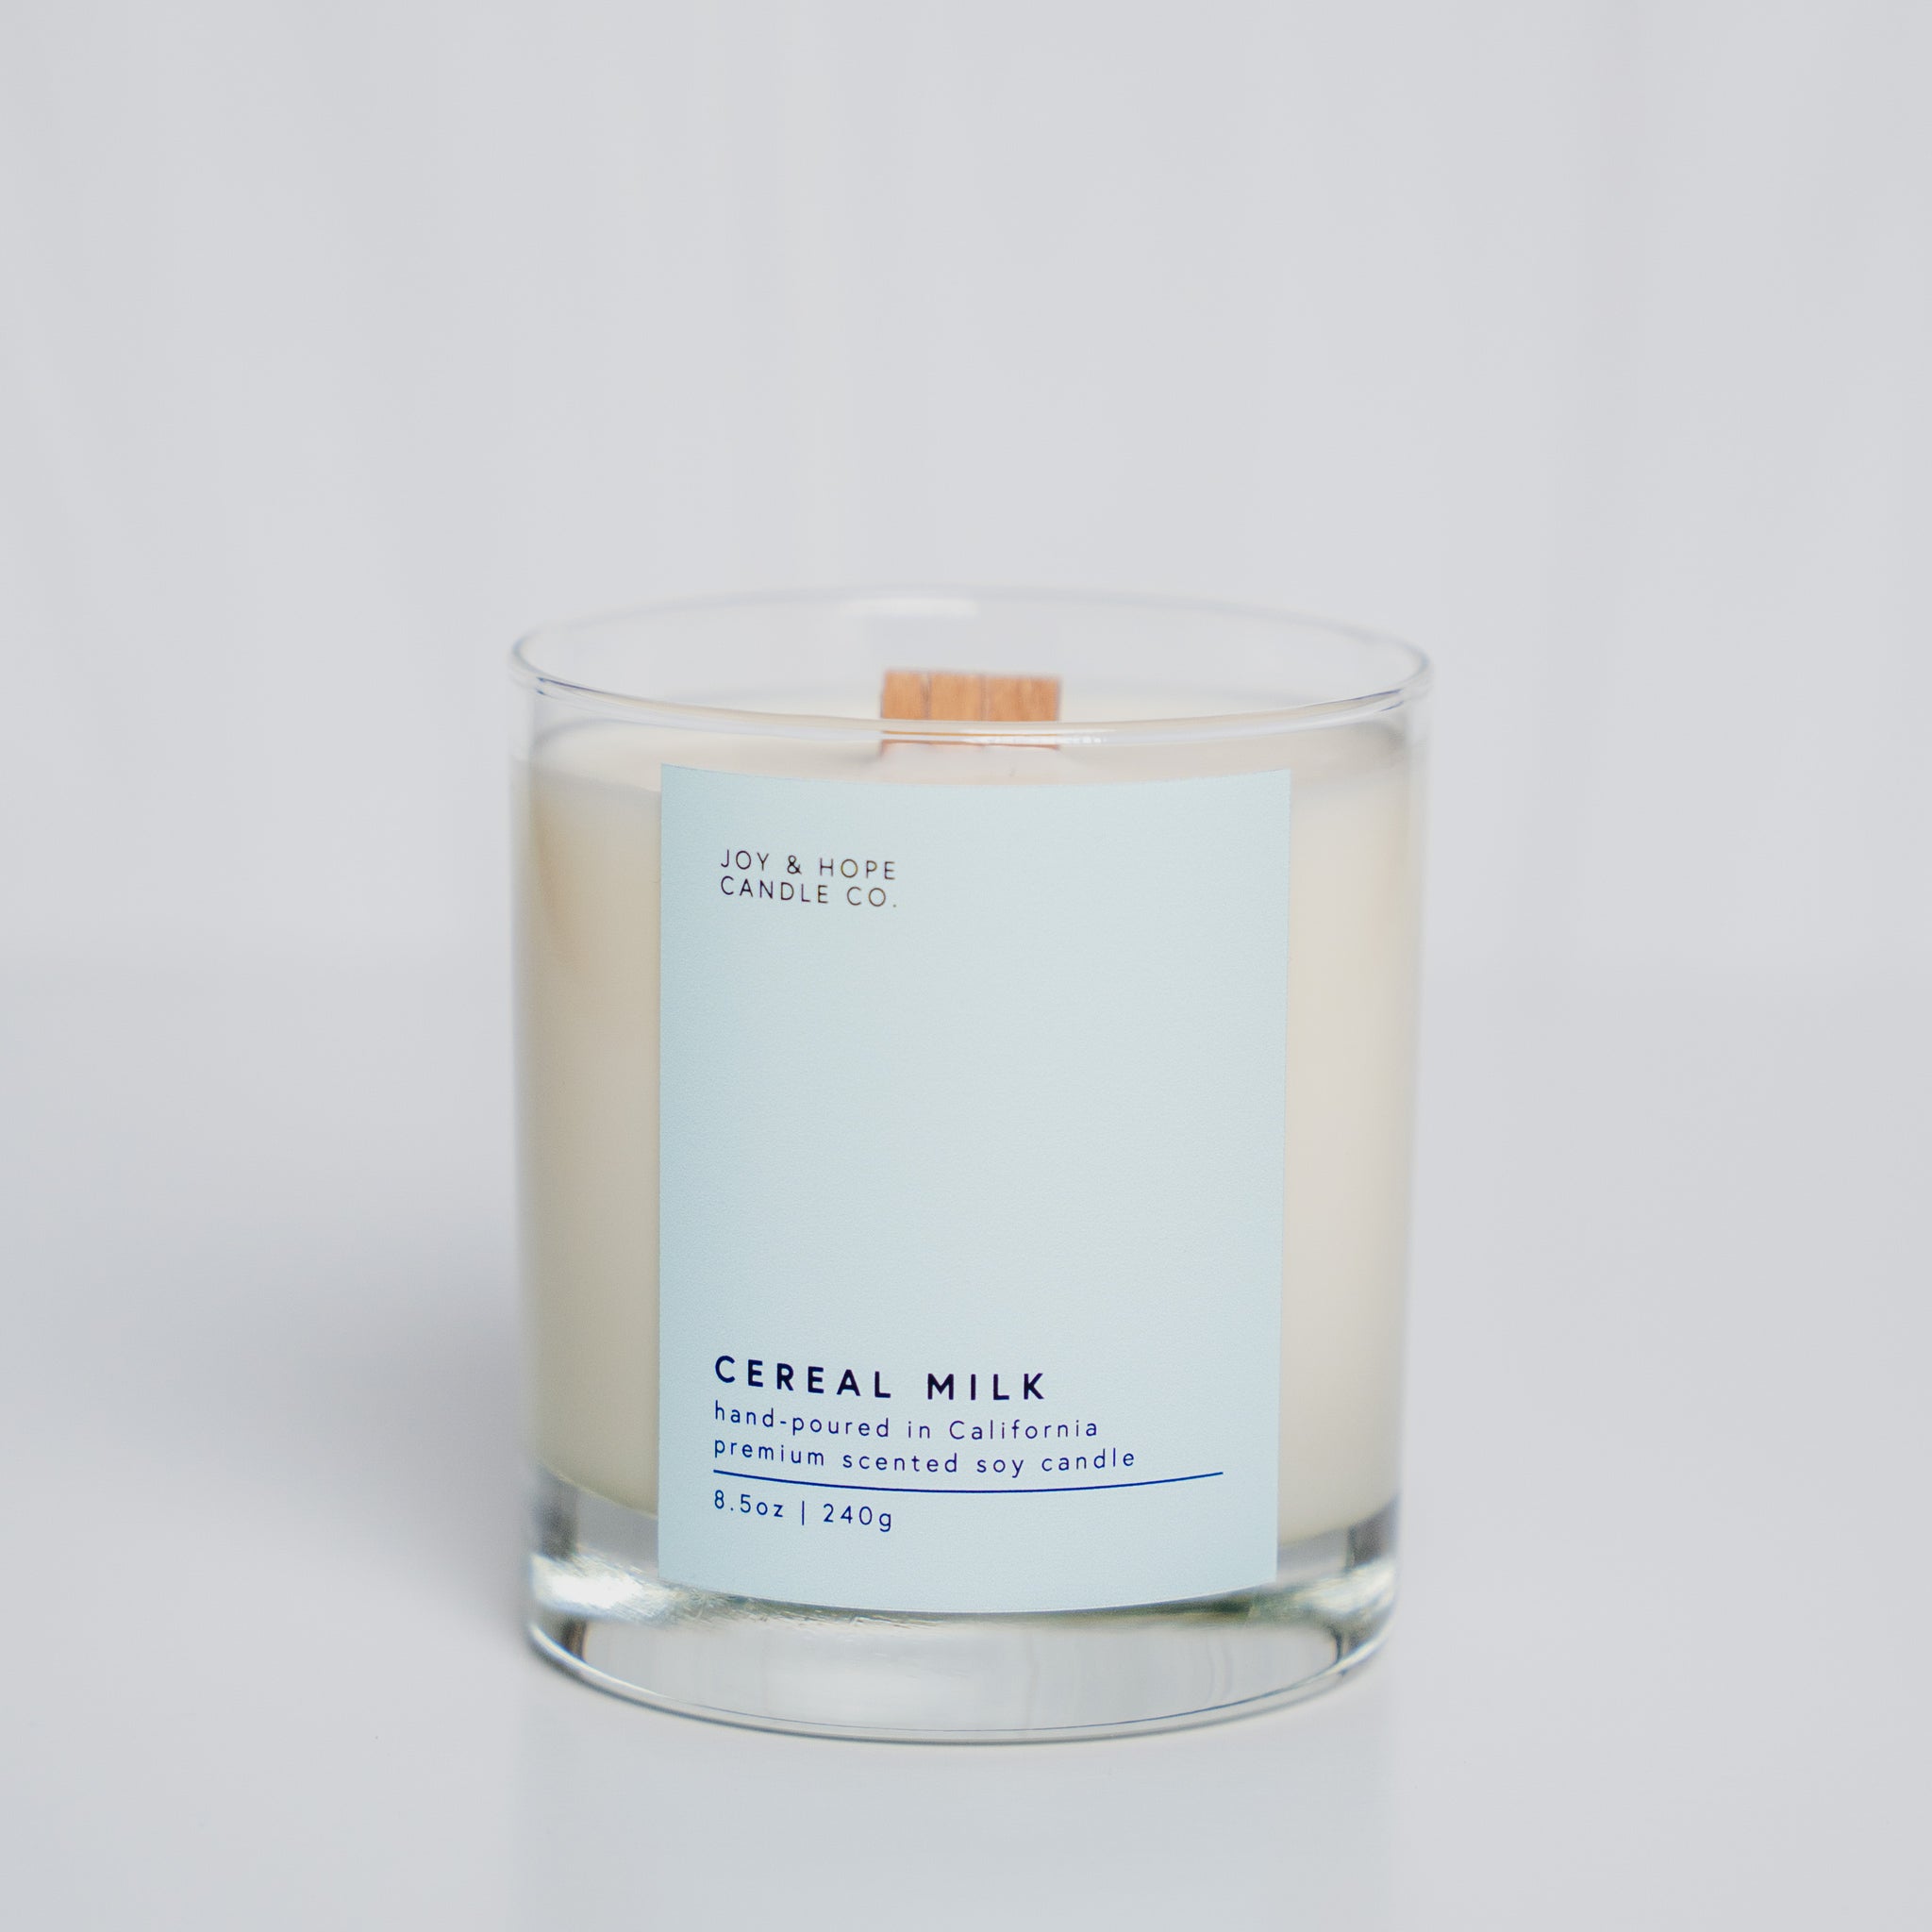 Cereal Milk - Wood Wick Candle (8.5oz)